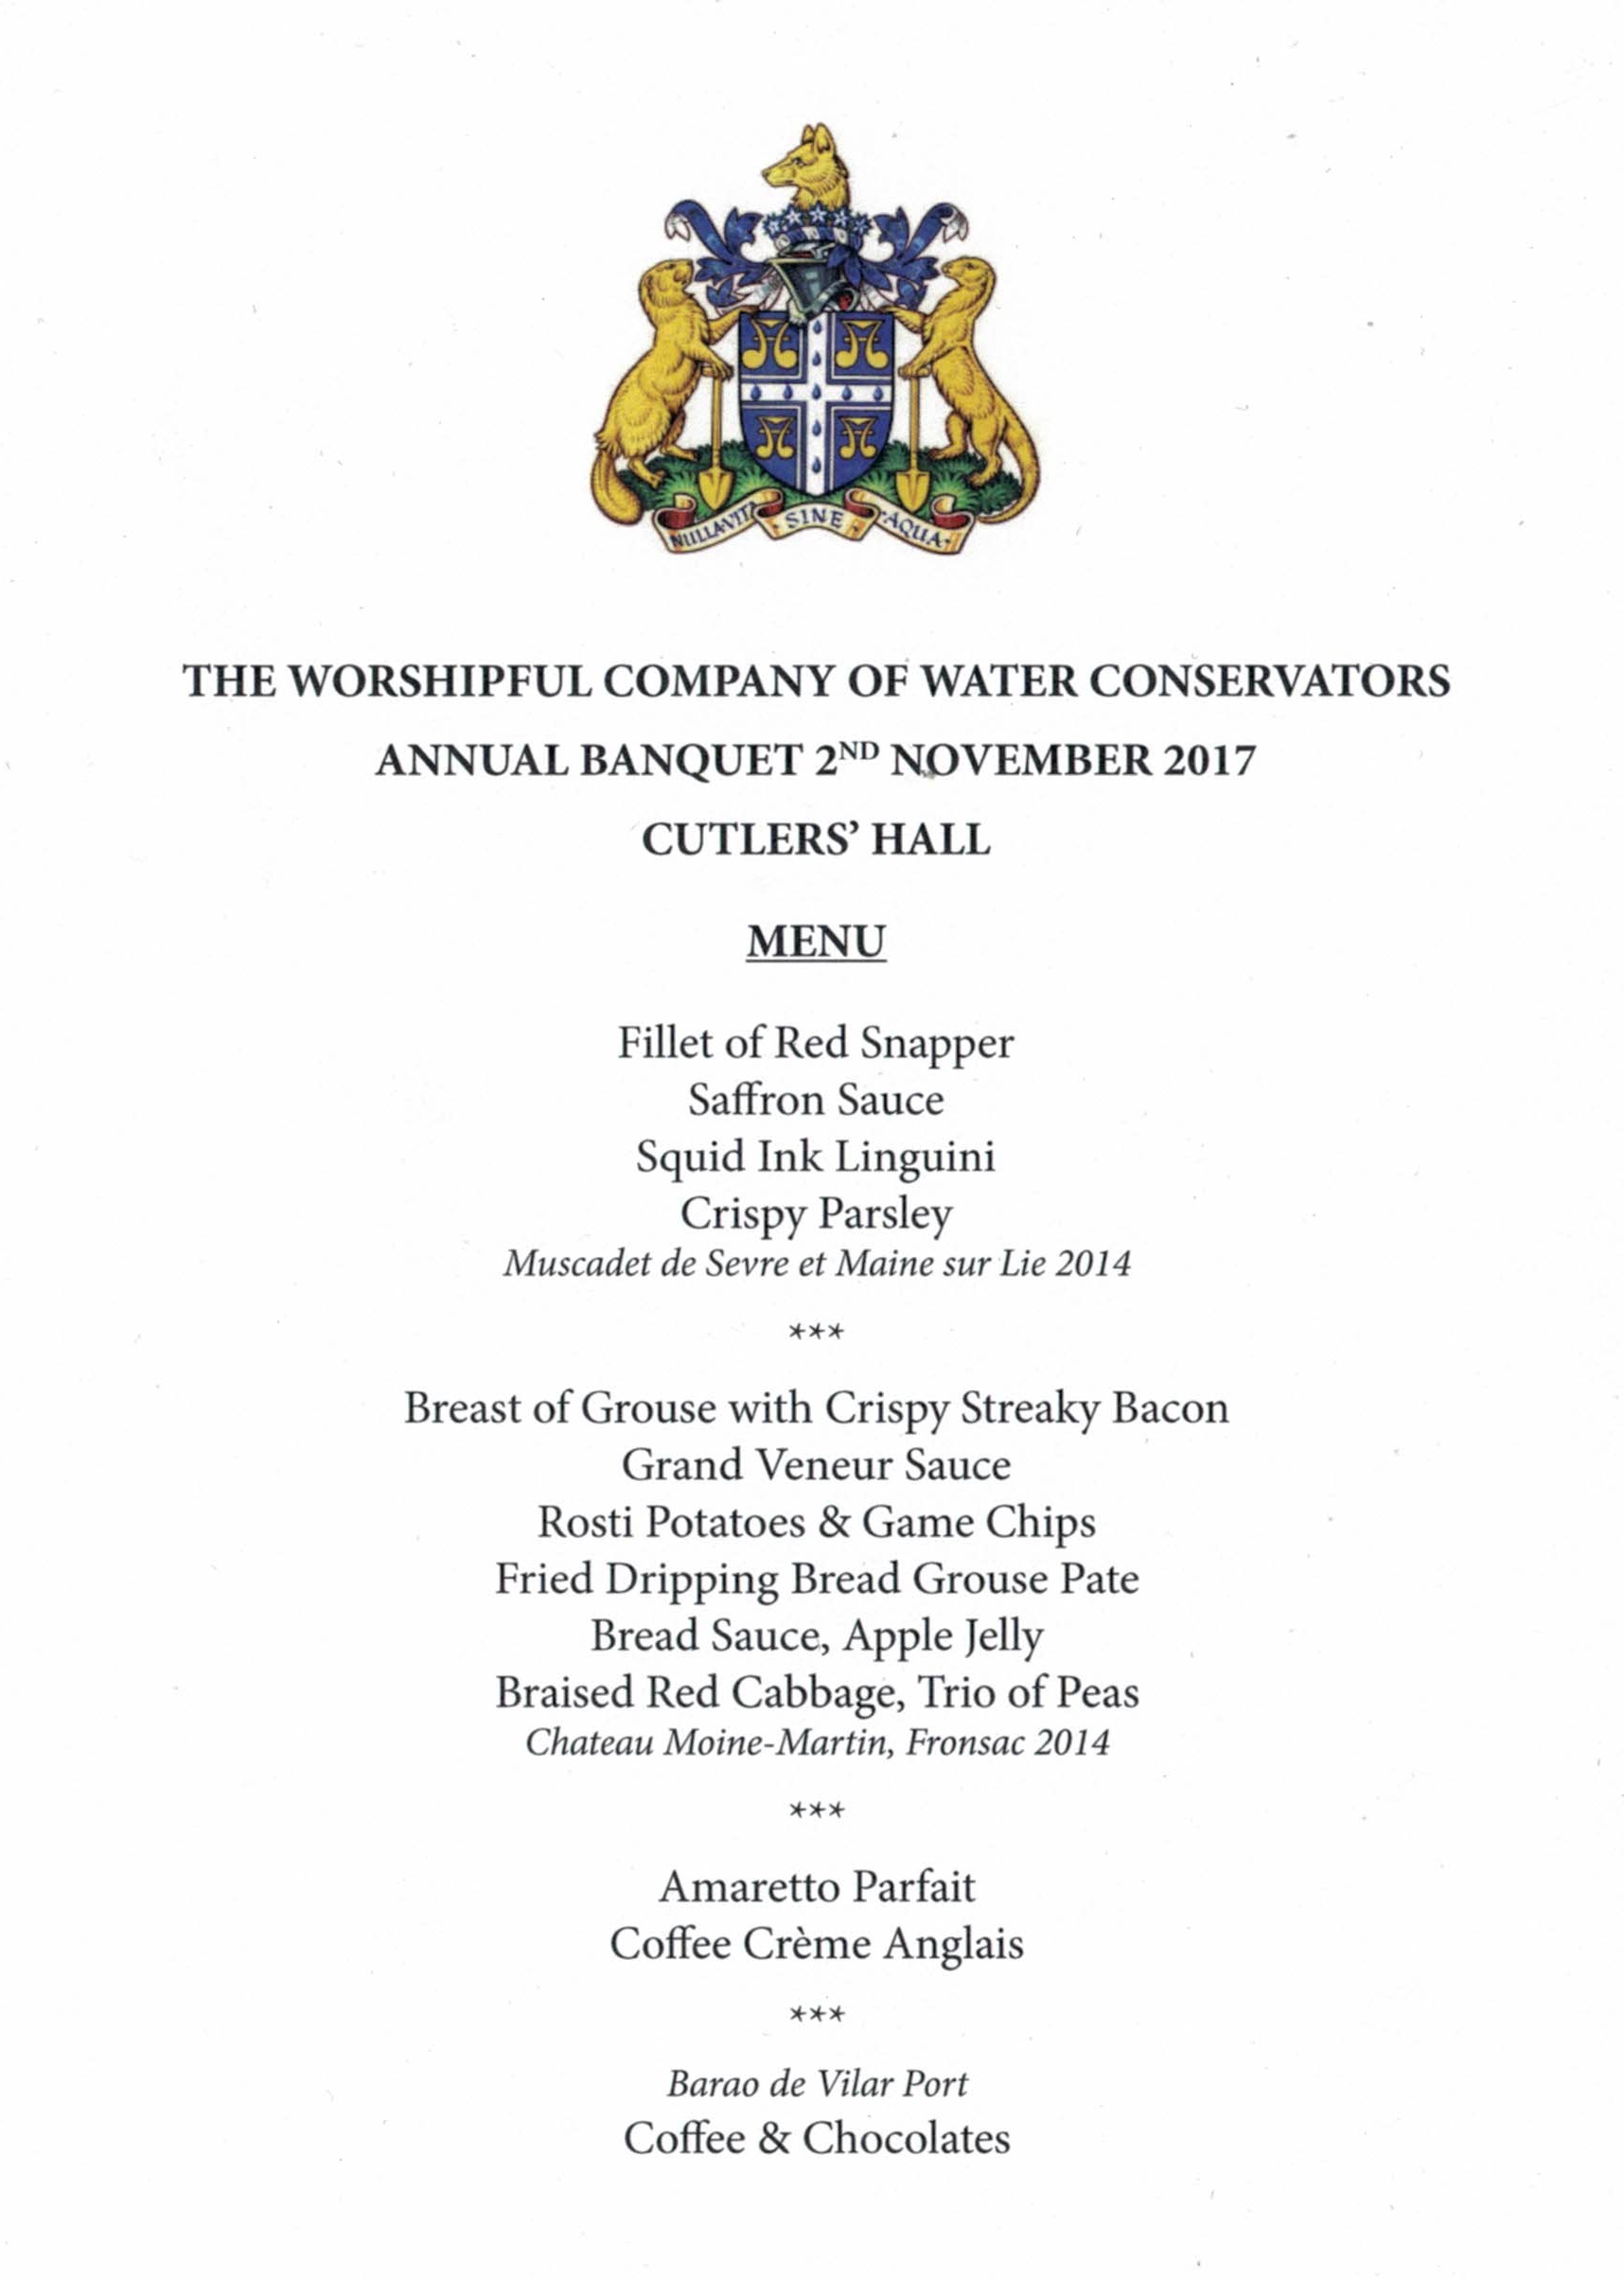 Water Conservators Annual Banquet at Cutlers Hall - November 2017